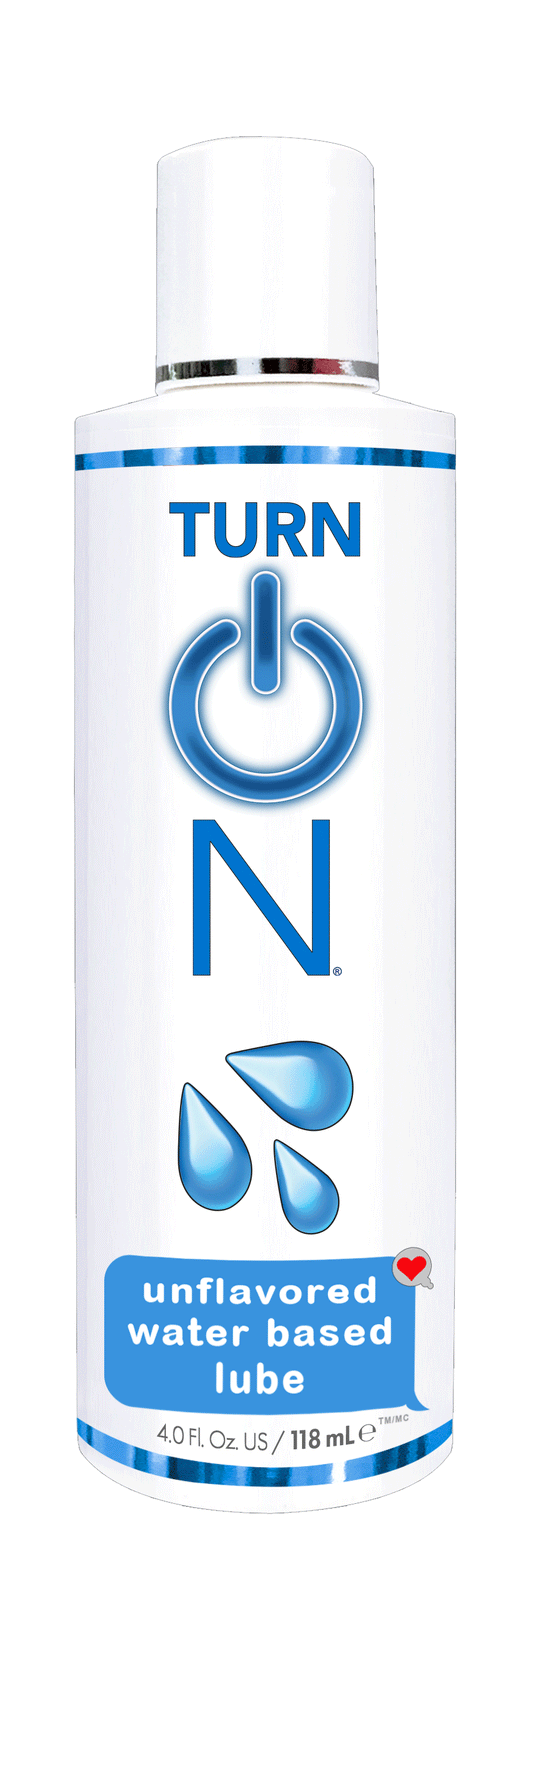 Turn on Unflavored Water Based Lube - 4 Fl. Oz. - My Sex Toy Hub